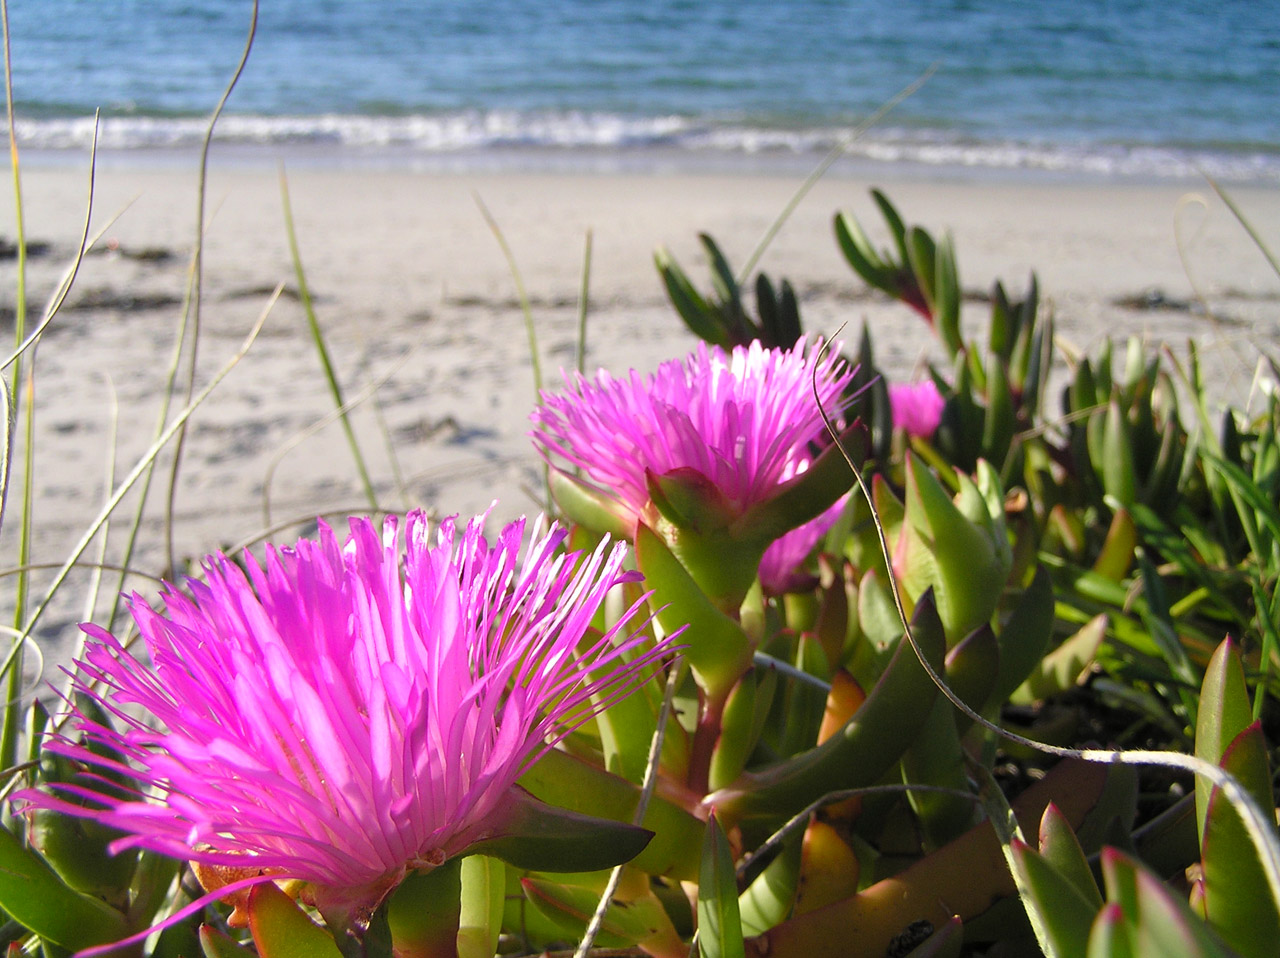 Bright pink flowers with sand and water in background